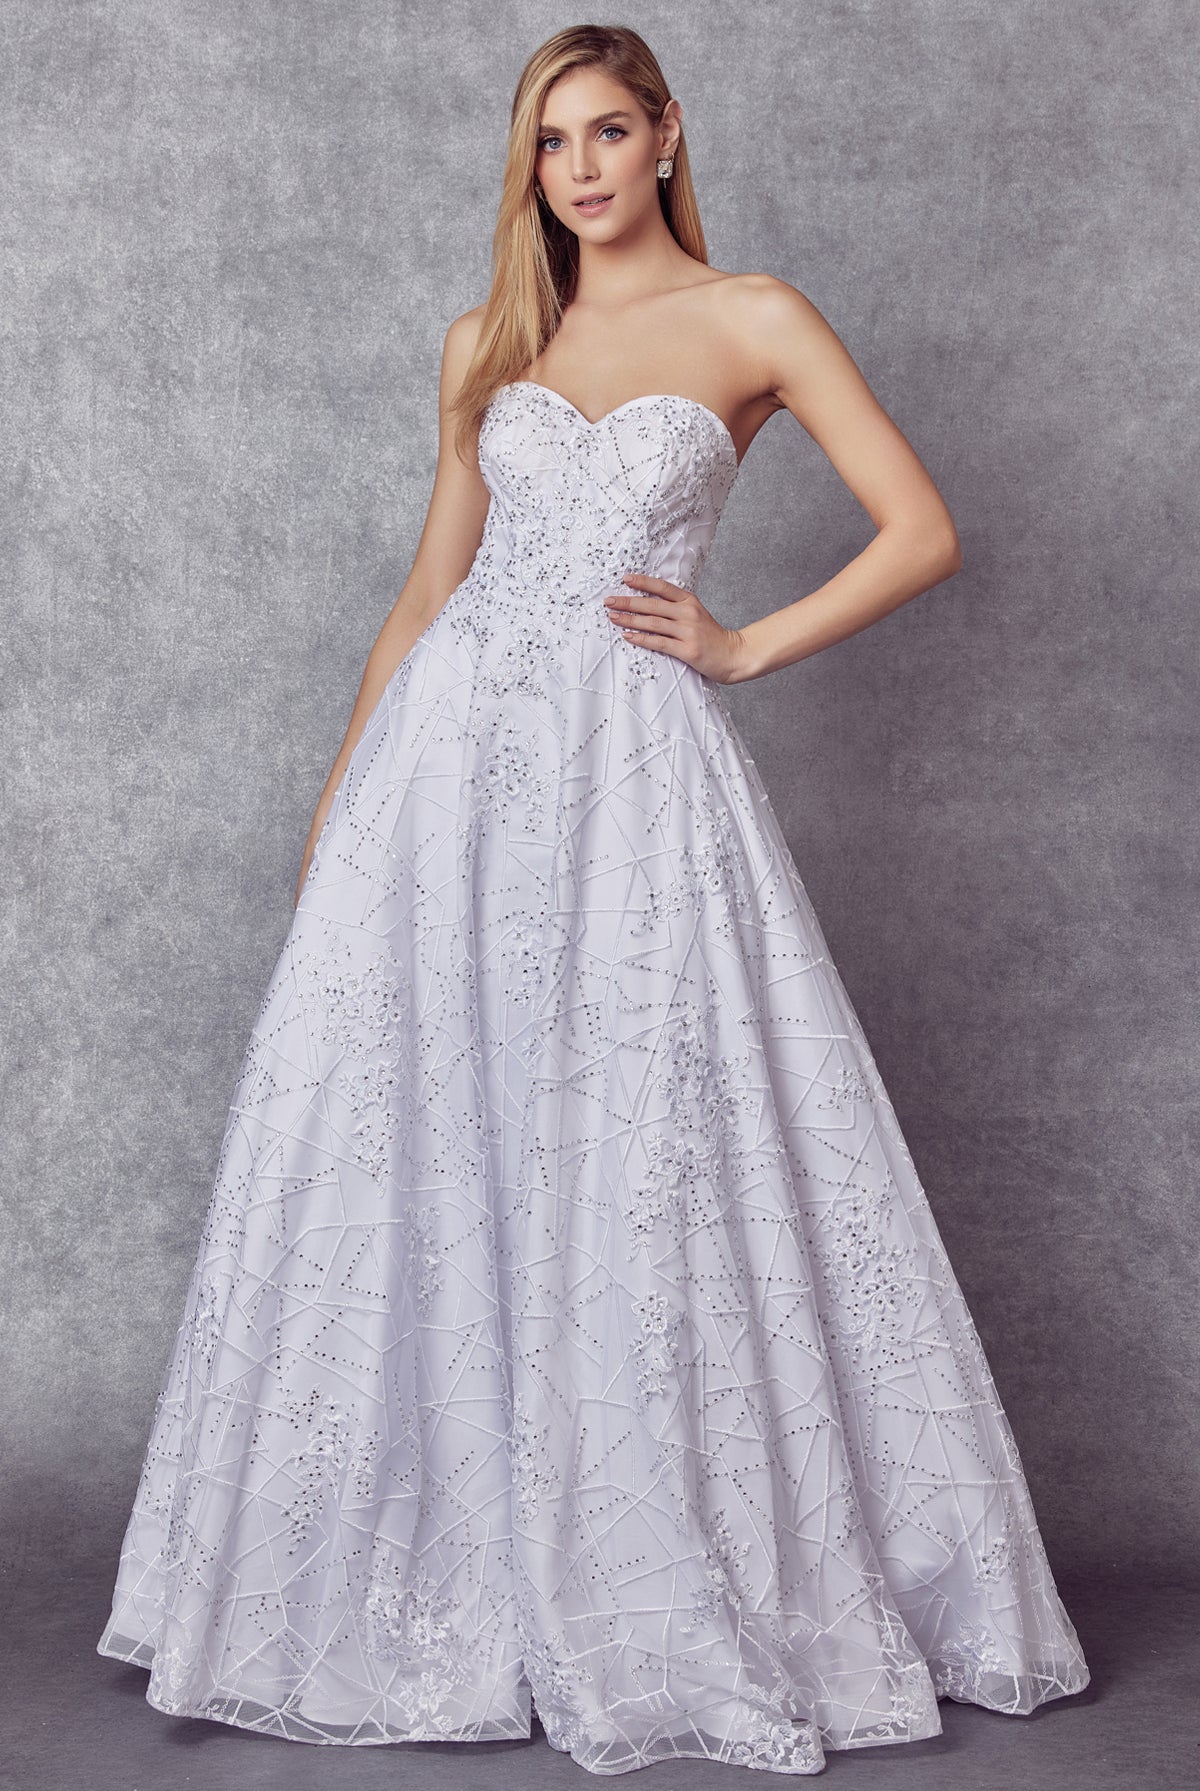 Arm bands with embroidered lace ball gown-smcdress